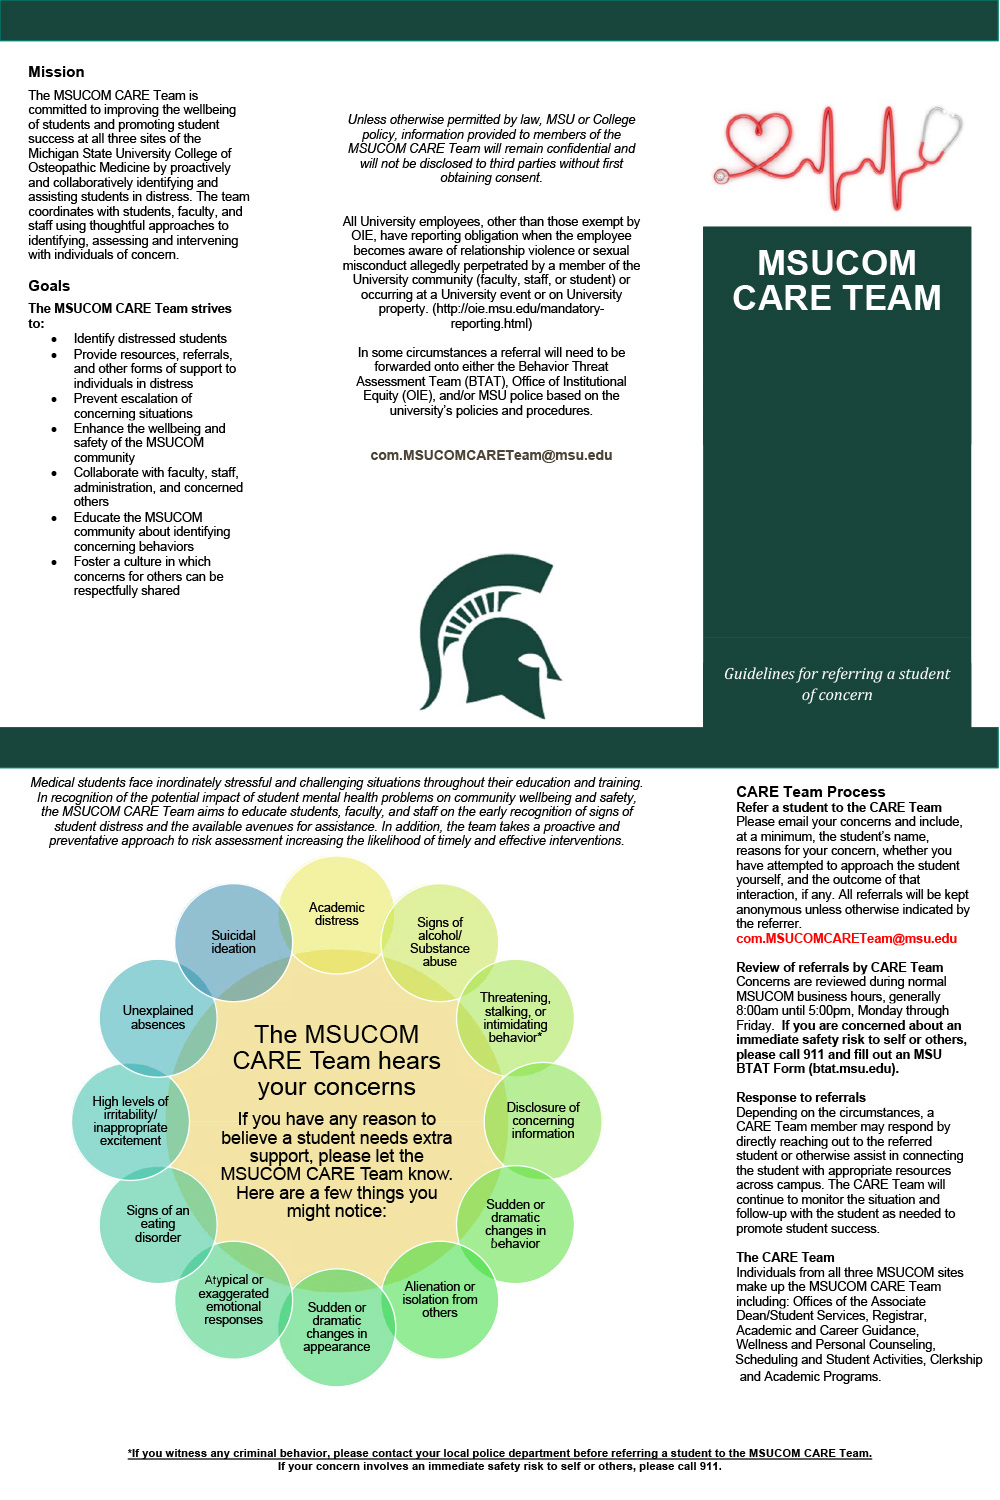 CARE-Team-folding-brochure. Contact our support team if you need an accessible format.